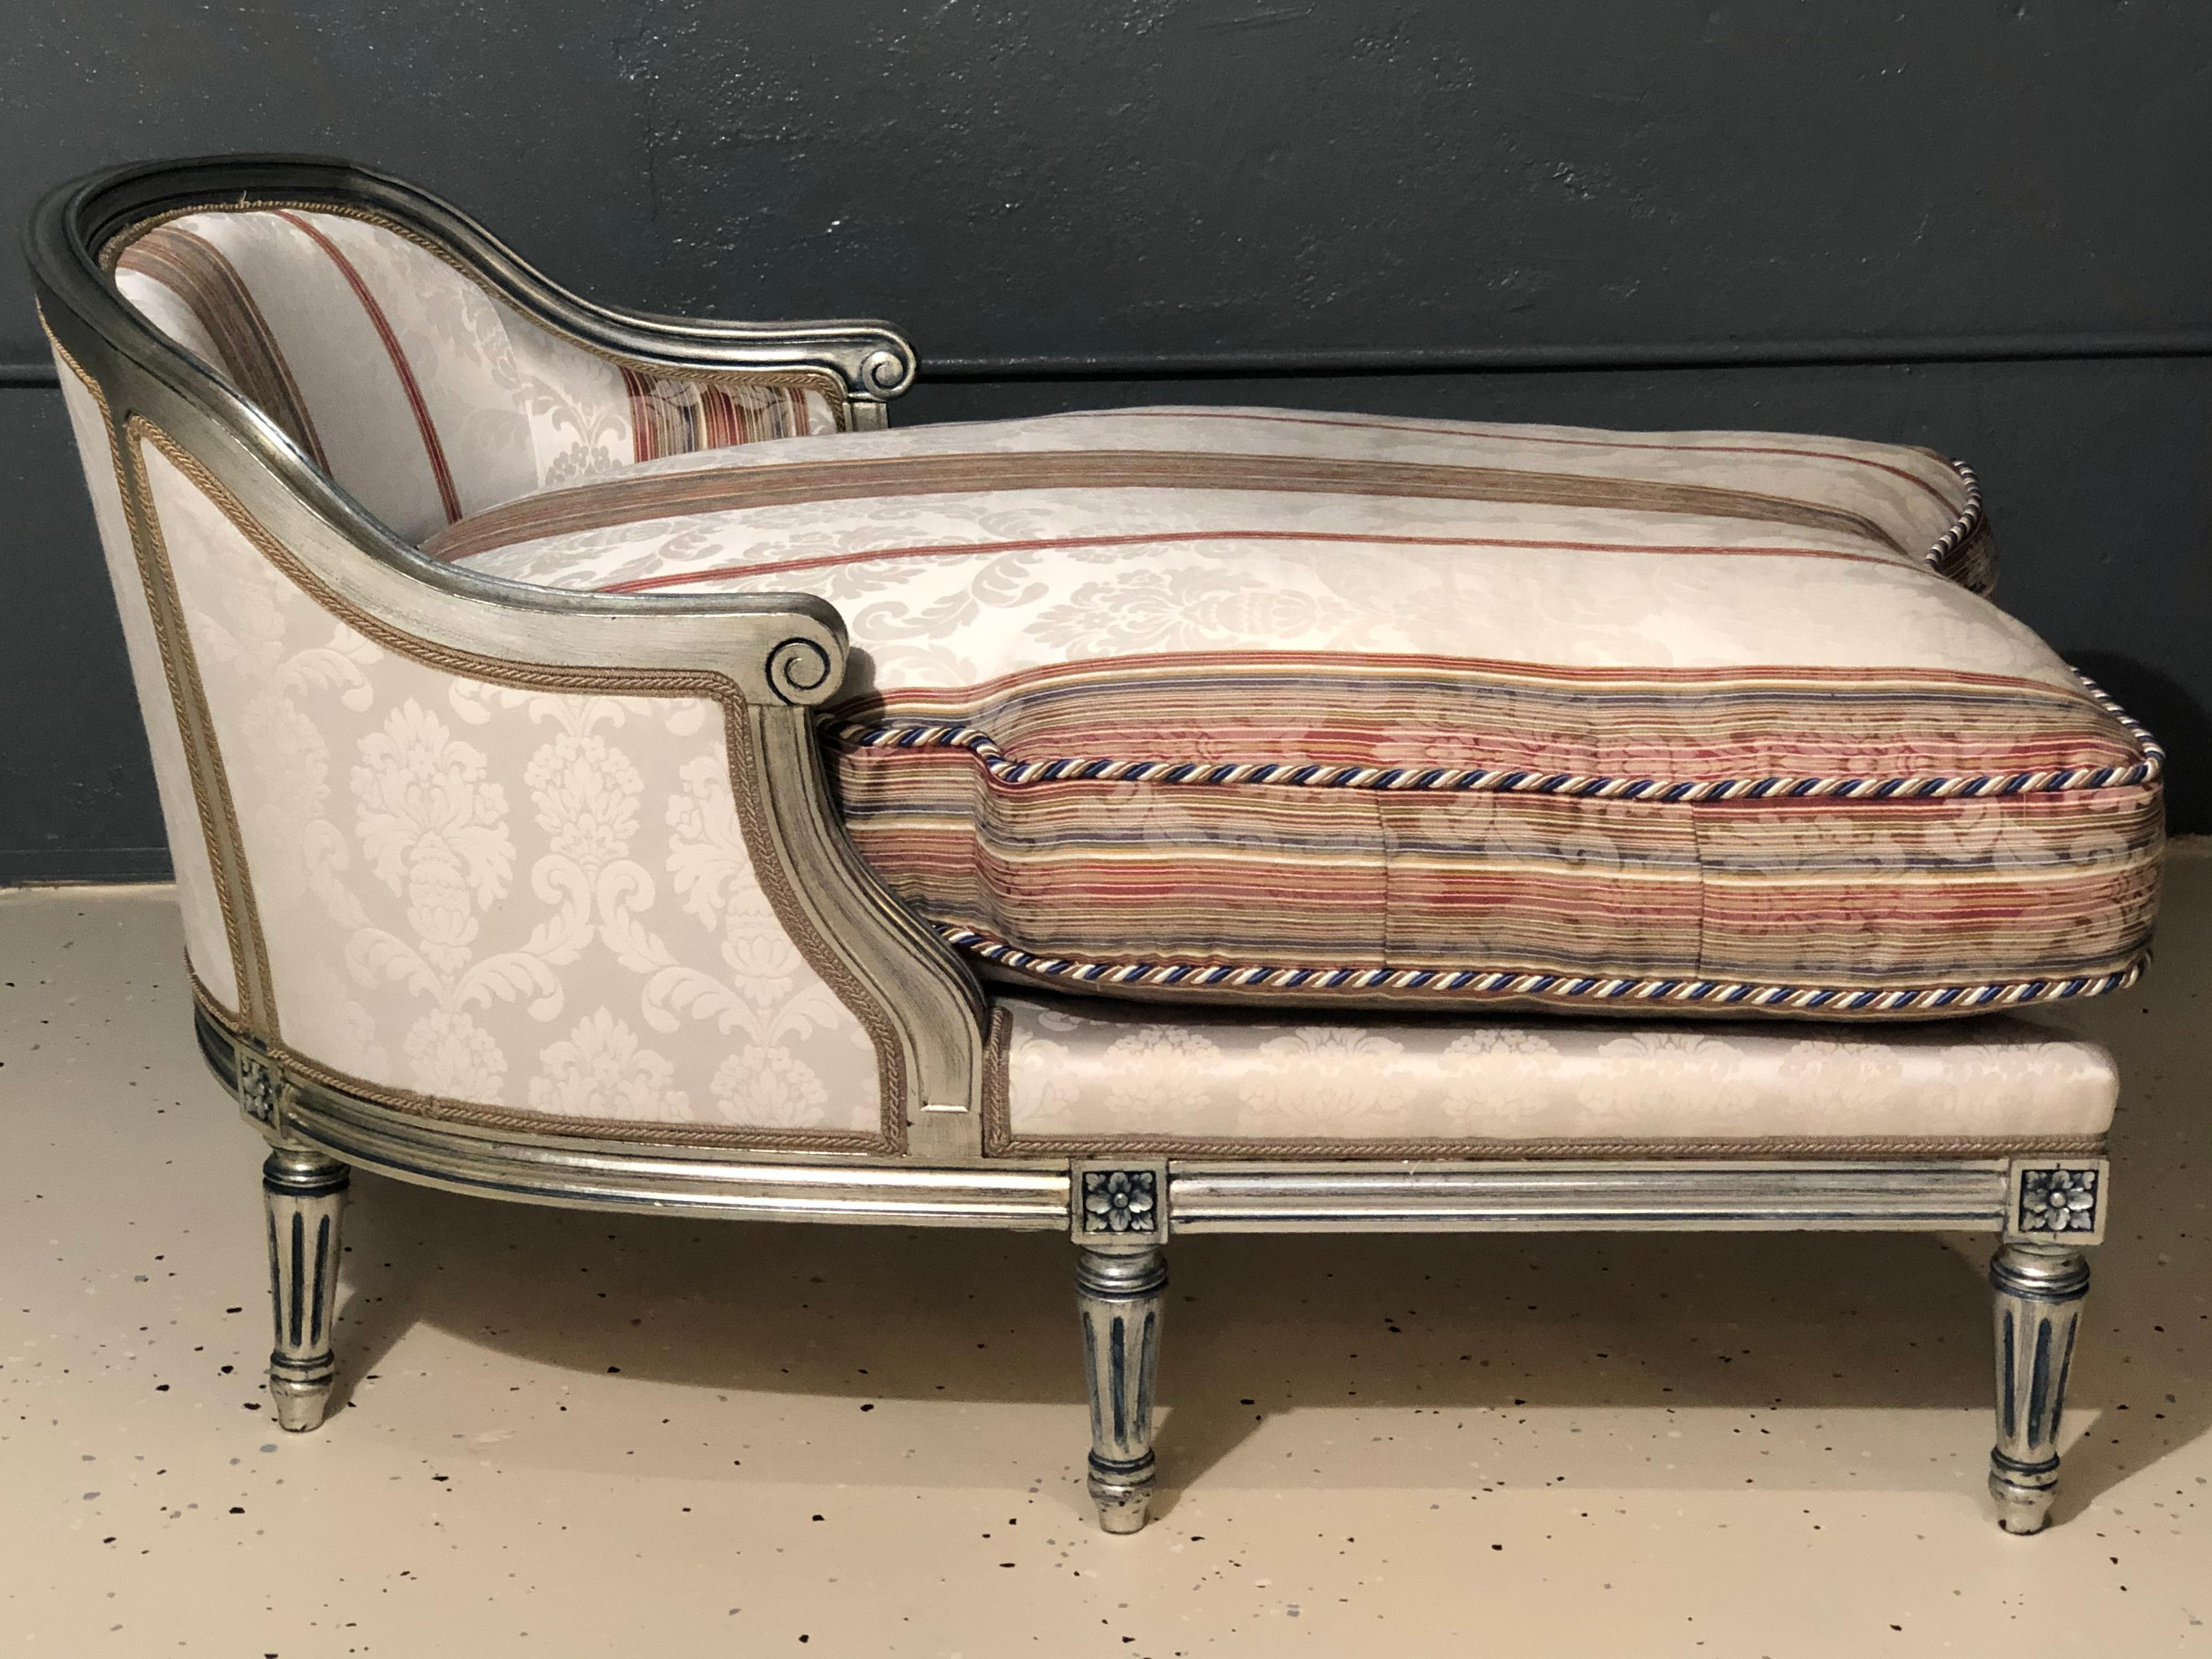 Jansen Inspired, Hollywood Regency, Chaise Louges, Painted Wood, Silver, 1950s For Sale 5